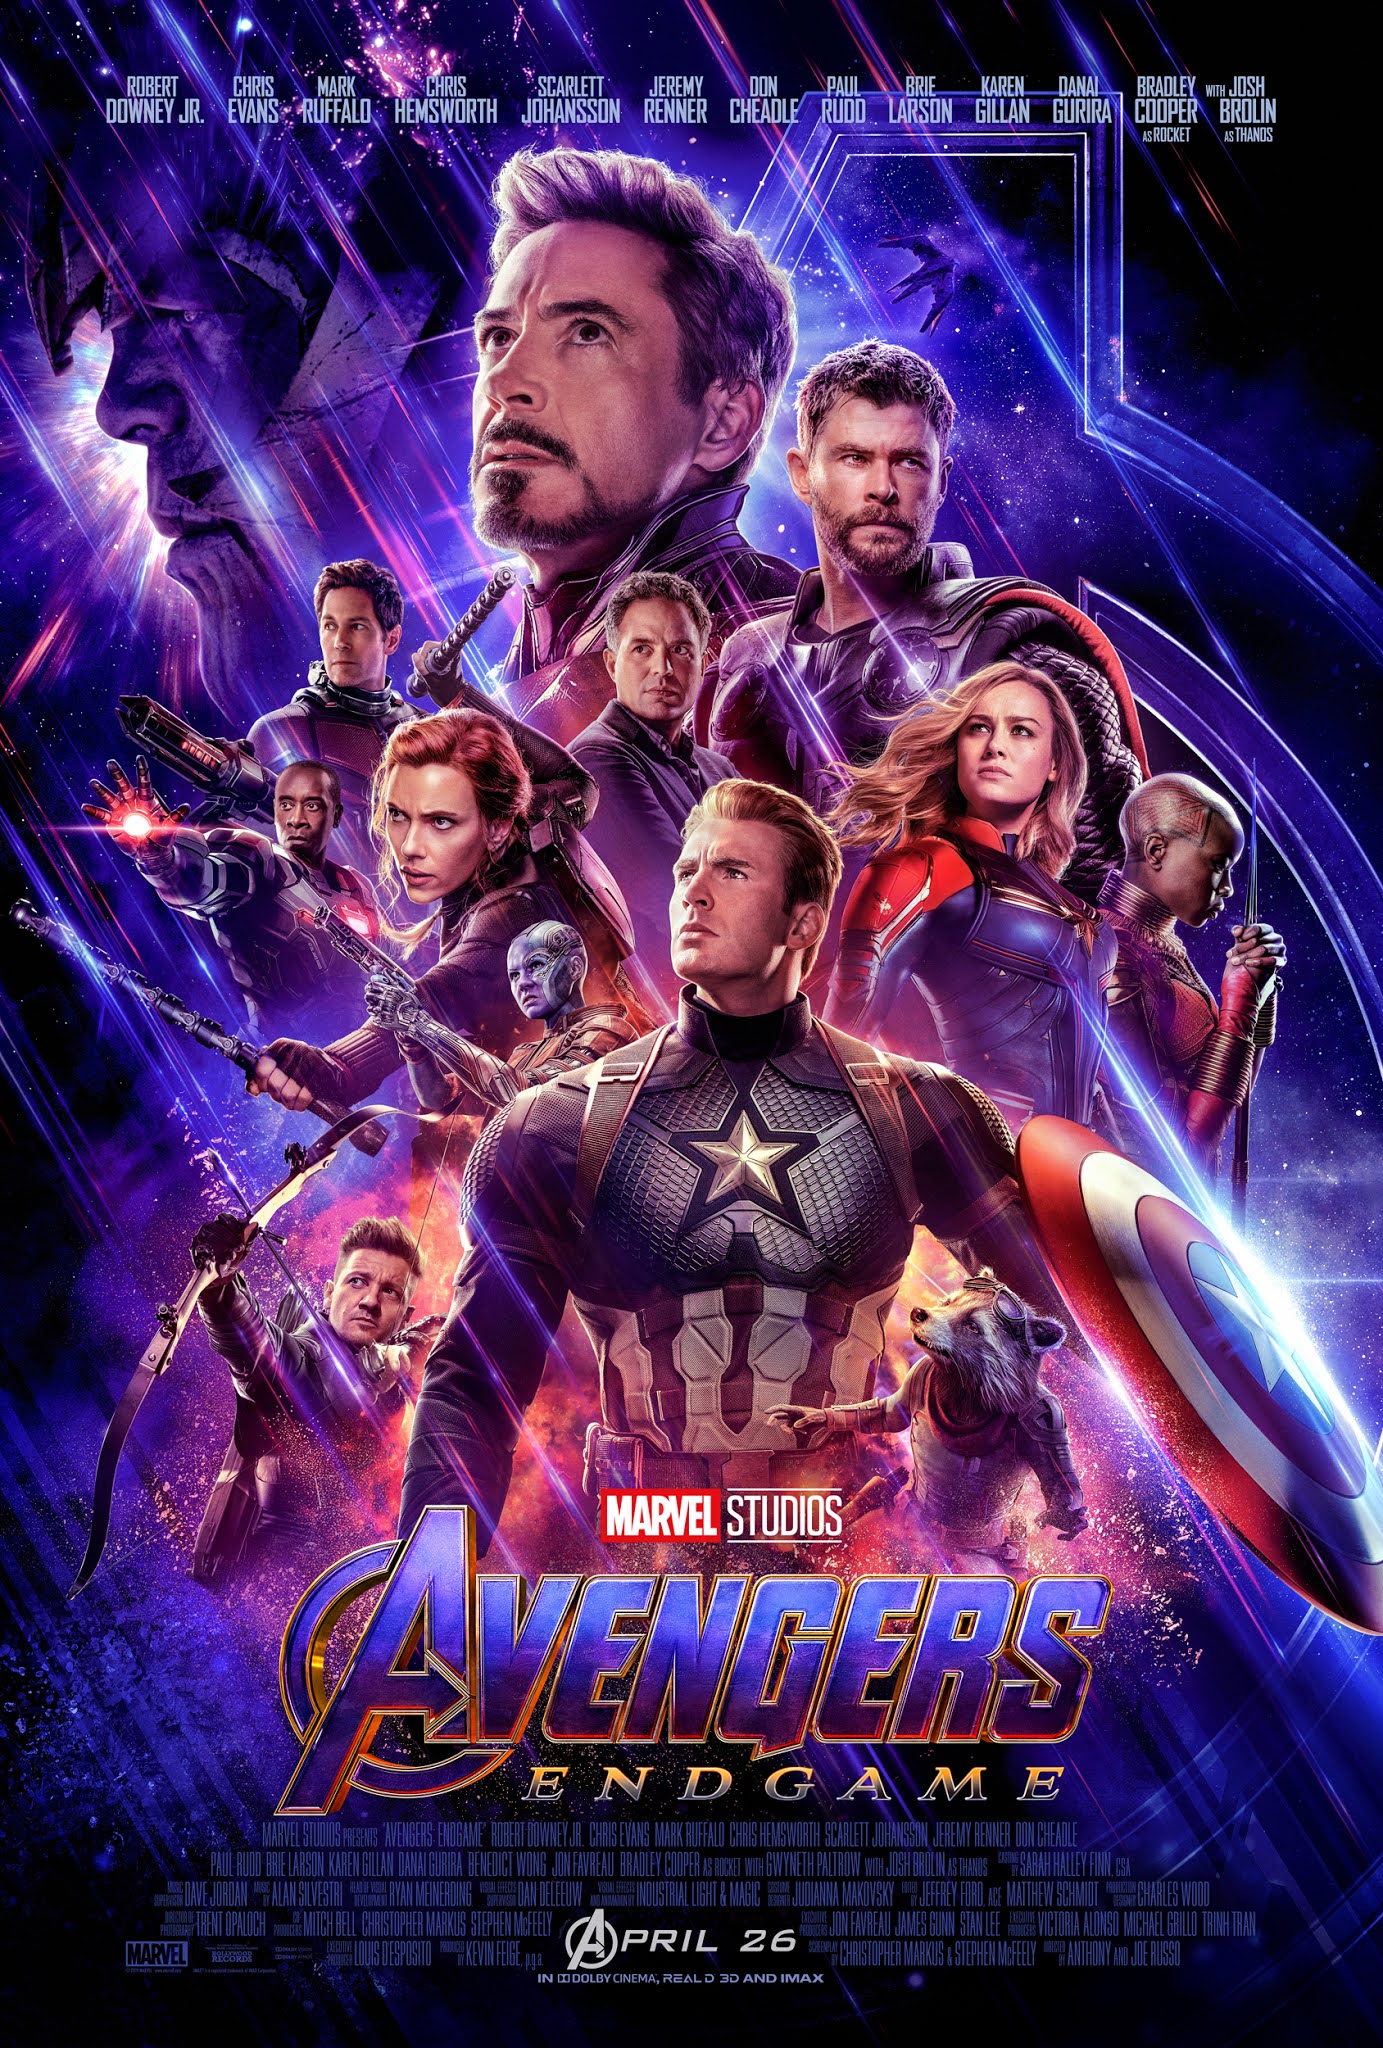 Avengers Endgame Movie 19 Cast Appearance Deleted Scenes And More Phase Three Marvel Cinematic Universe